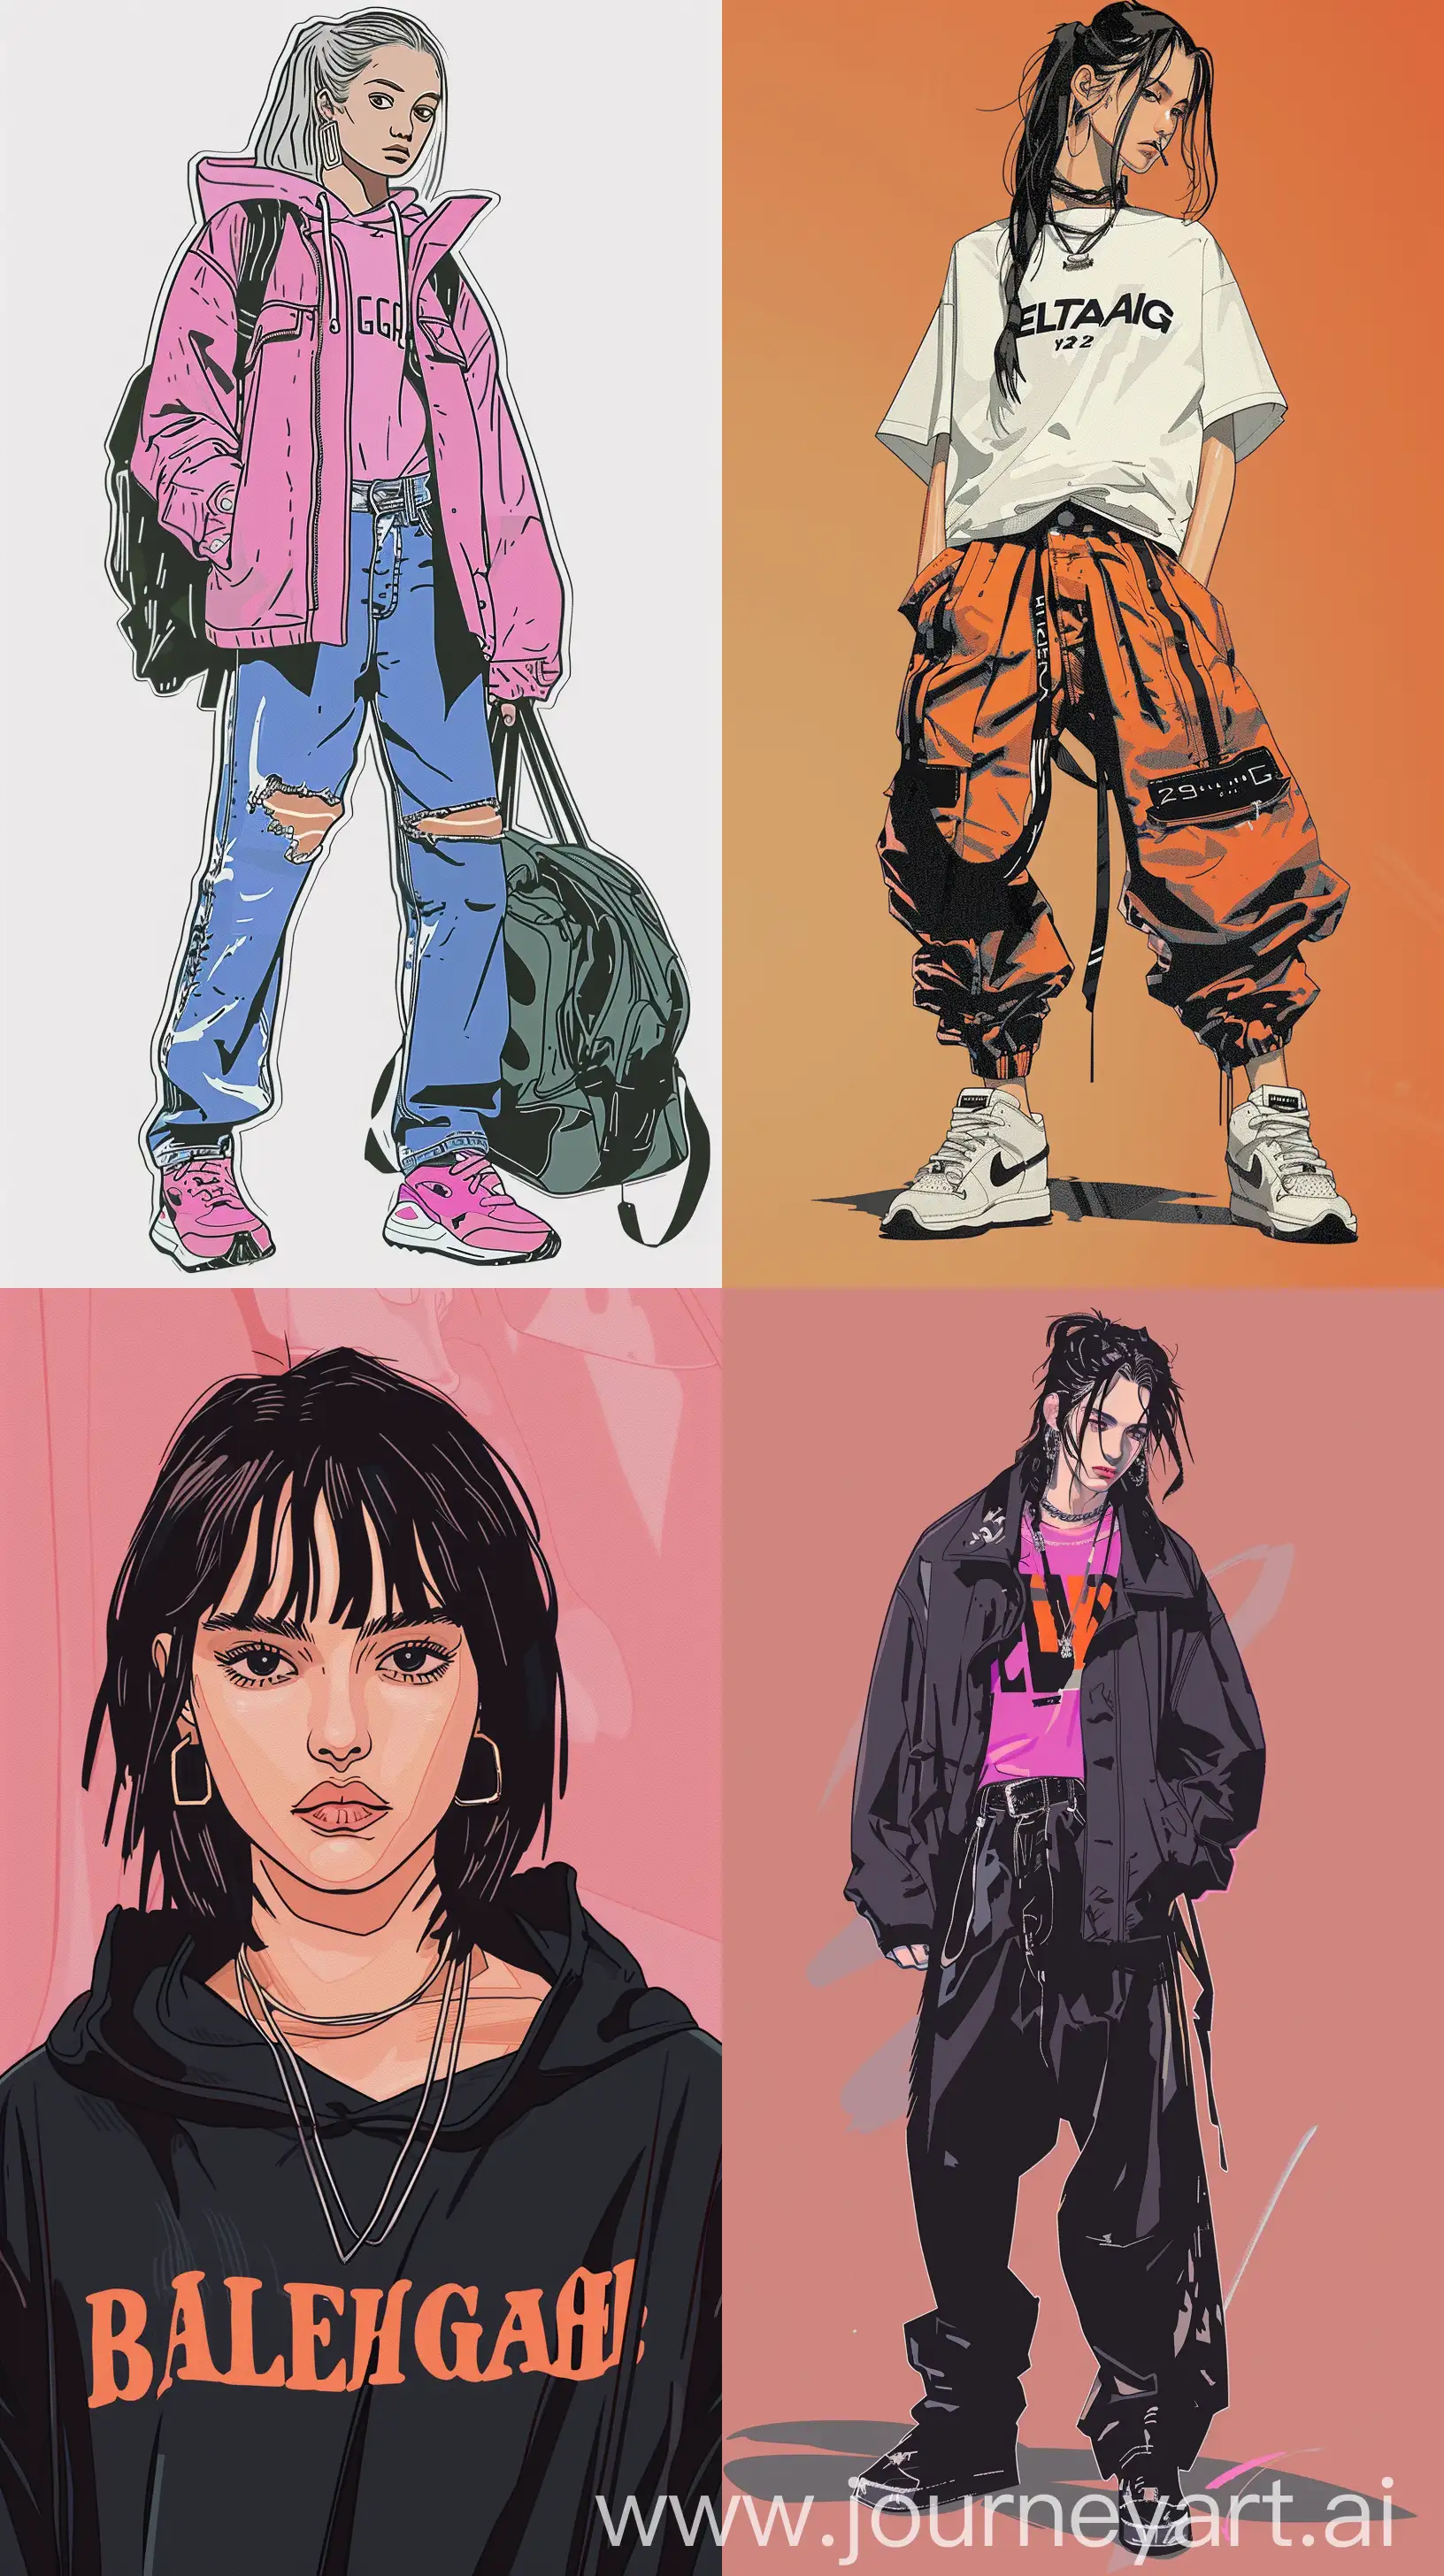 Aesthetic-Anime-Sticker-Design-Featuring-Balenciaga-and-Y2K-Elements